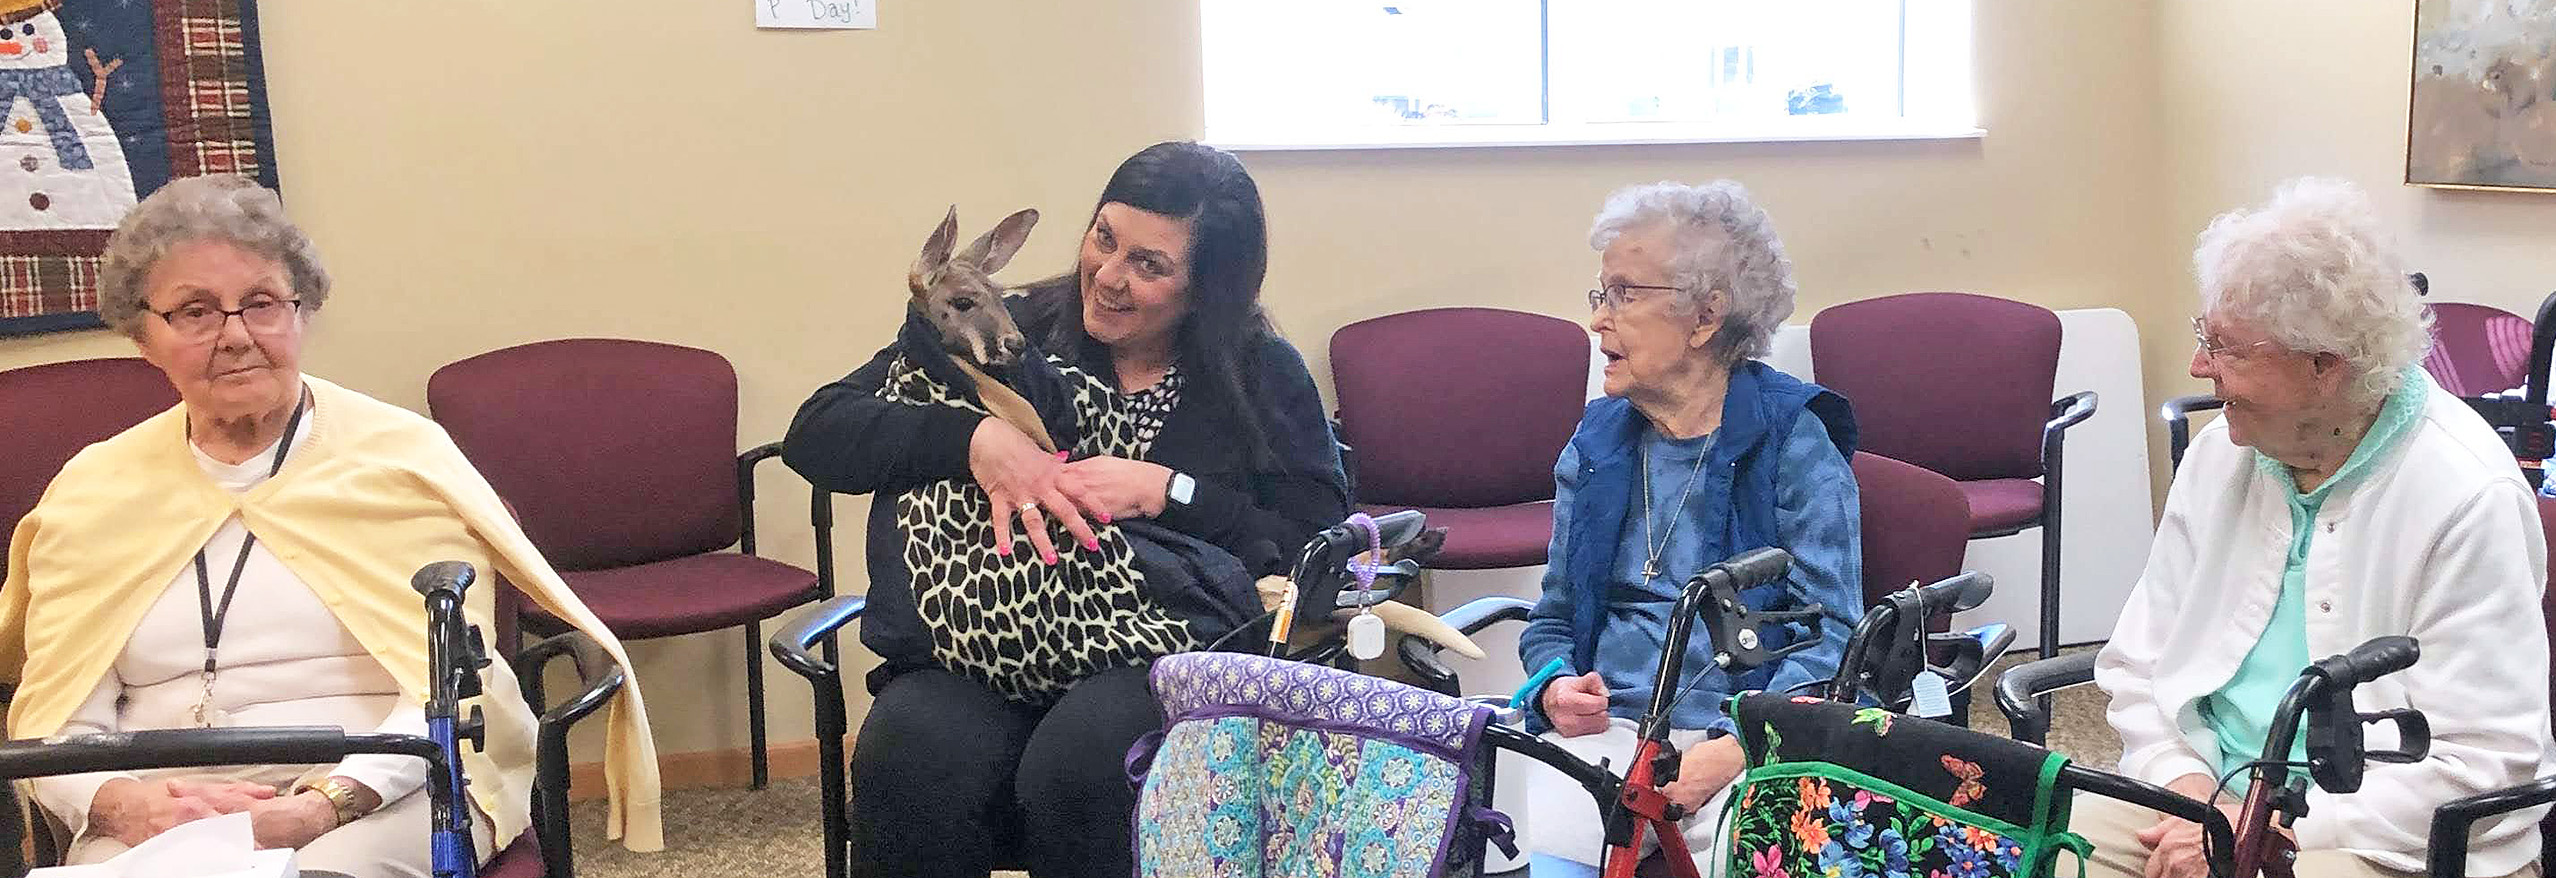 Park Place seniors are enthralled with a visit from a kangaroo from Tiny Acres Farm in Muscoda.